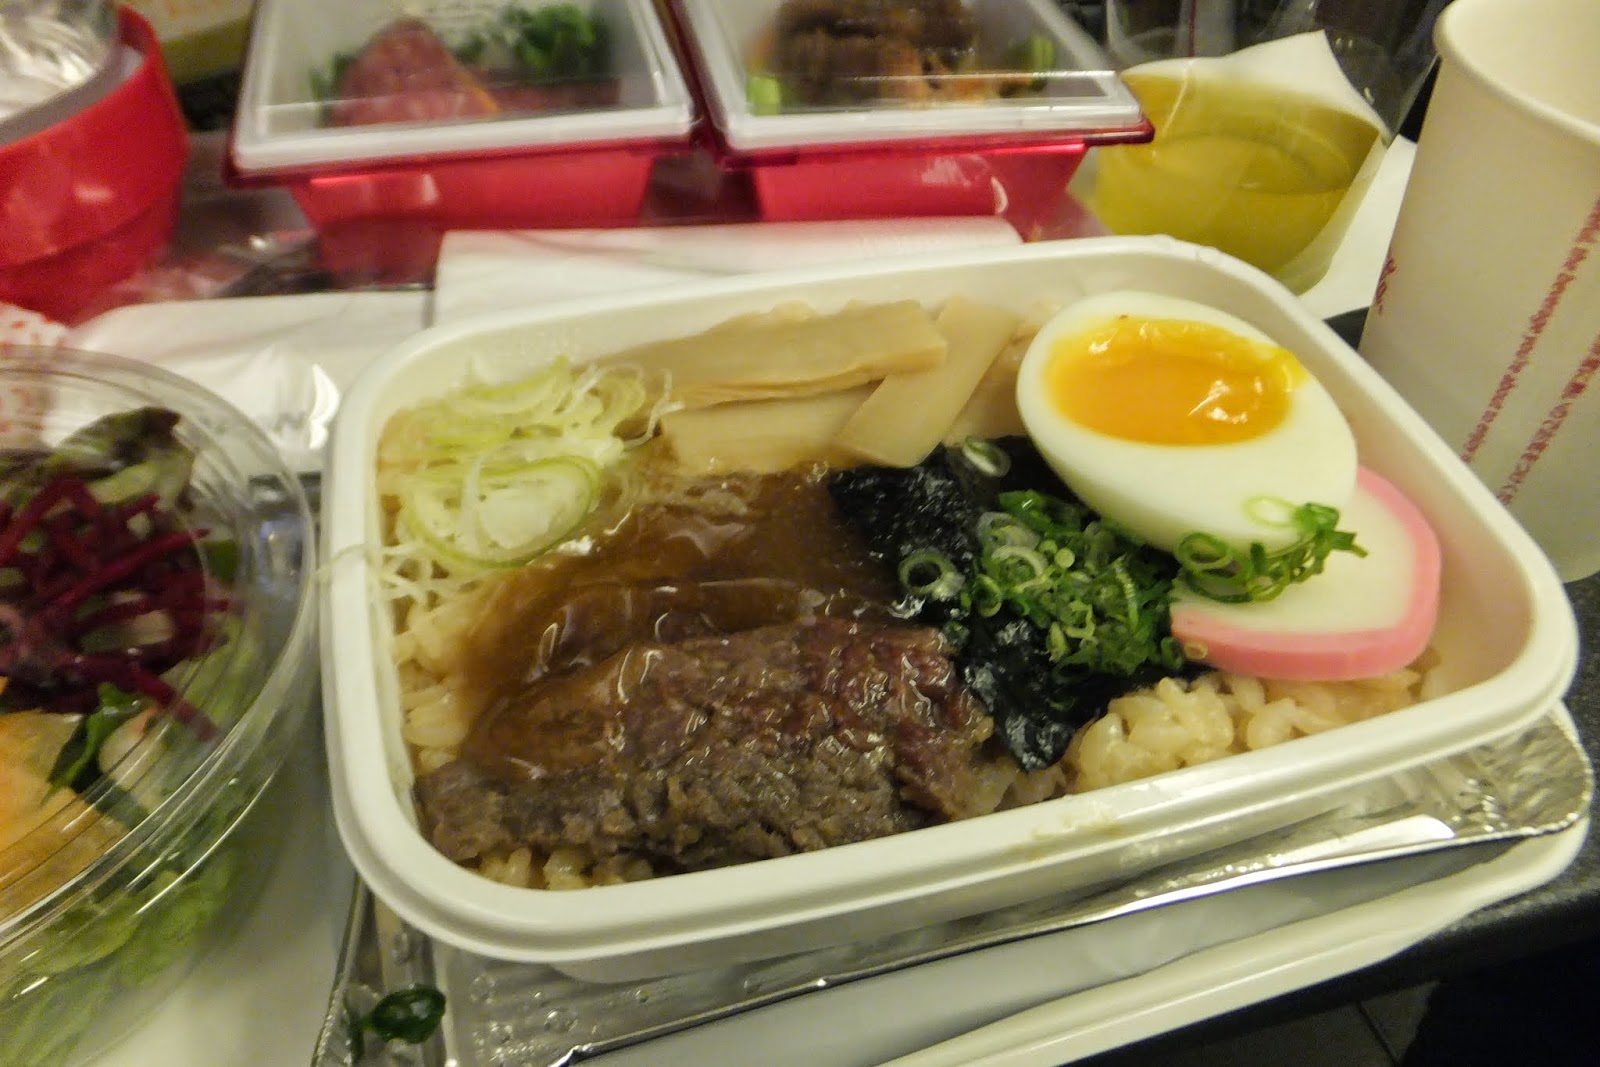 jal-sky-suite-ramen-bowl 機内食らーめんどんぶり